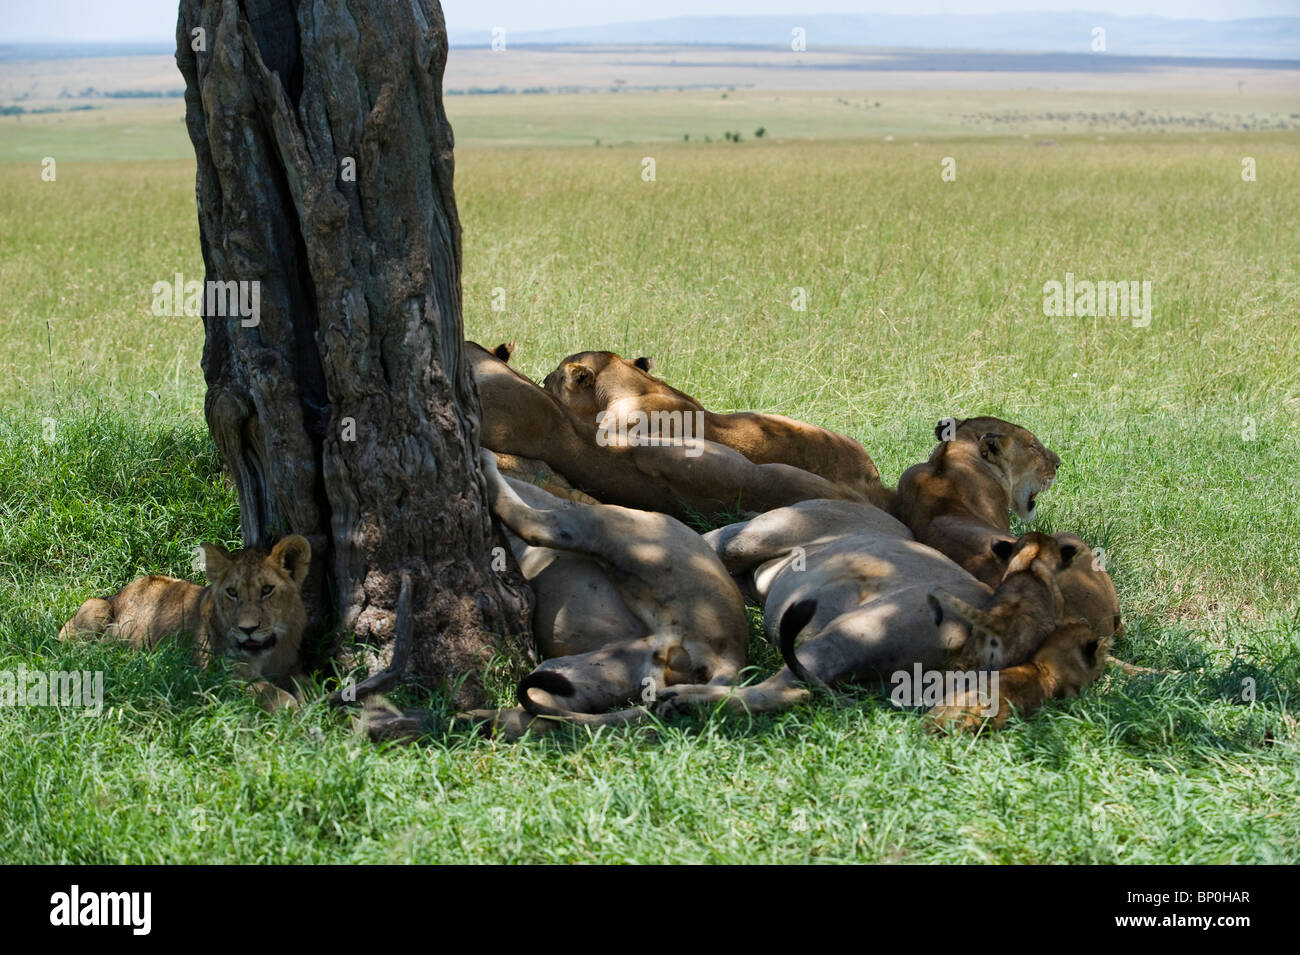 Kenya, Masai Mara. A pride of lions cluster together under the meagre shade of a balanites tree at midday. Stock Photo